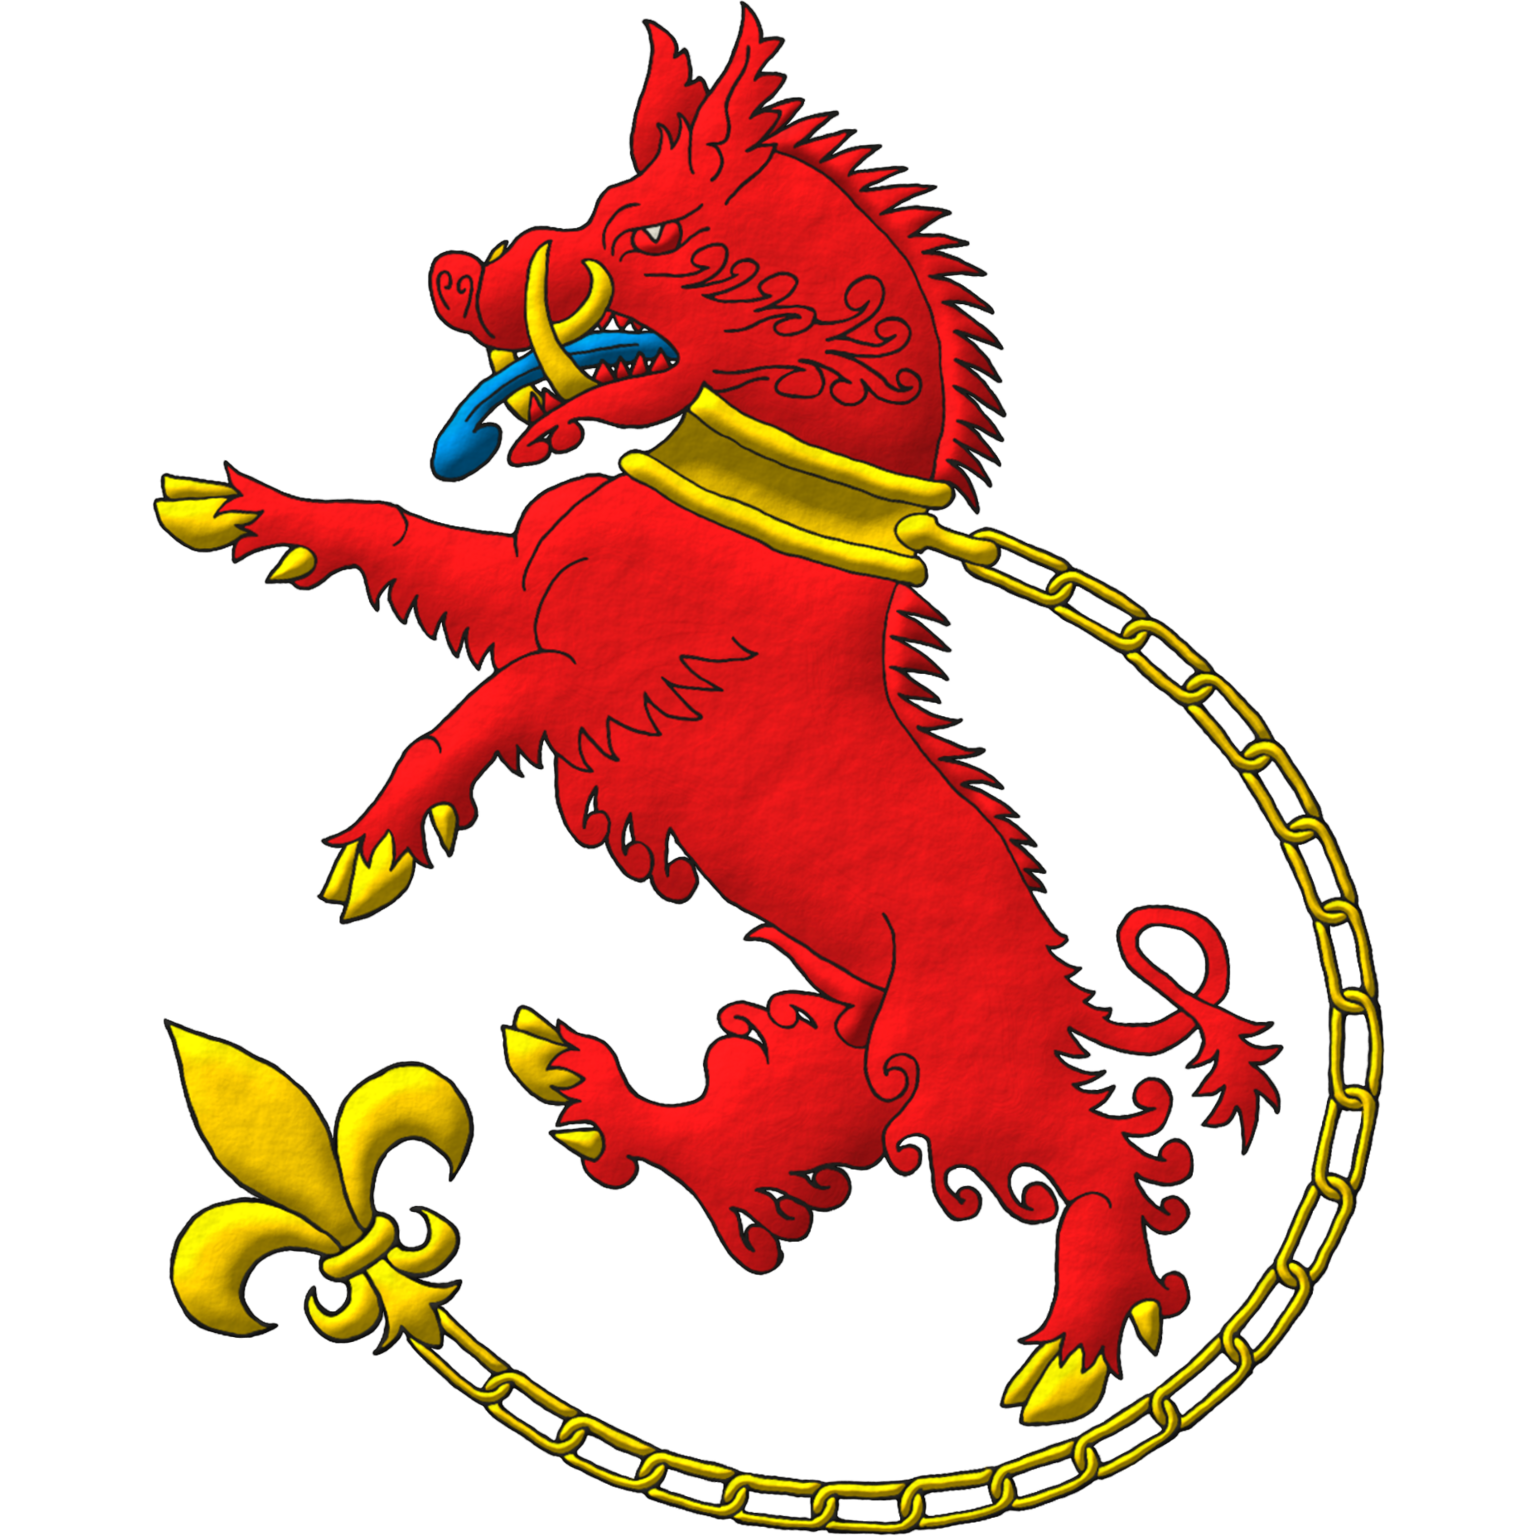 The heraldic badge of Arthur Richard Brinnhard emblazoned by me. Badge: A boar rampant Gules, langued Azure, tusked, unguled, collared and chained ending in a fleur de lis Or.